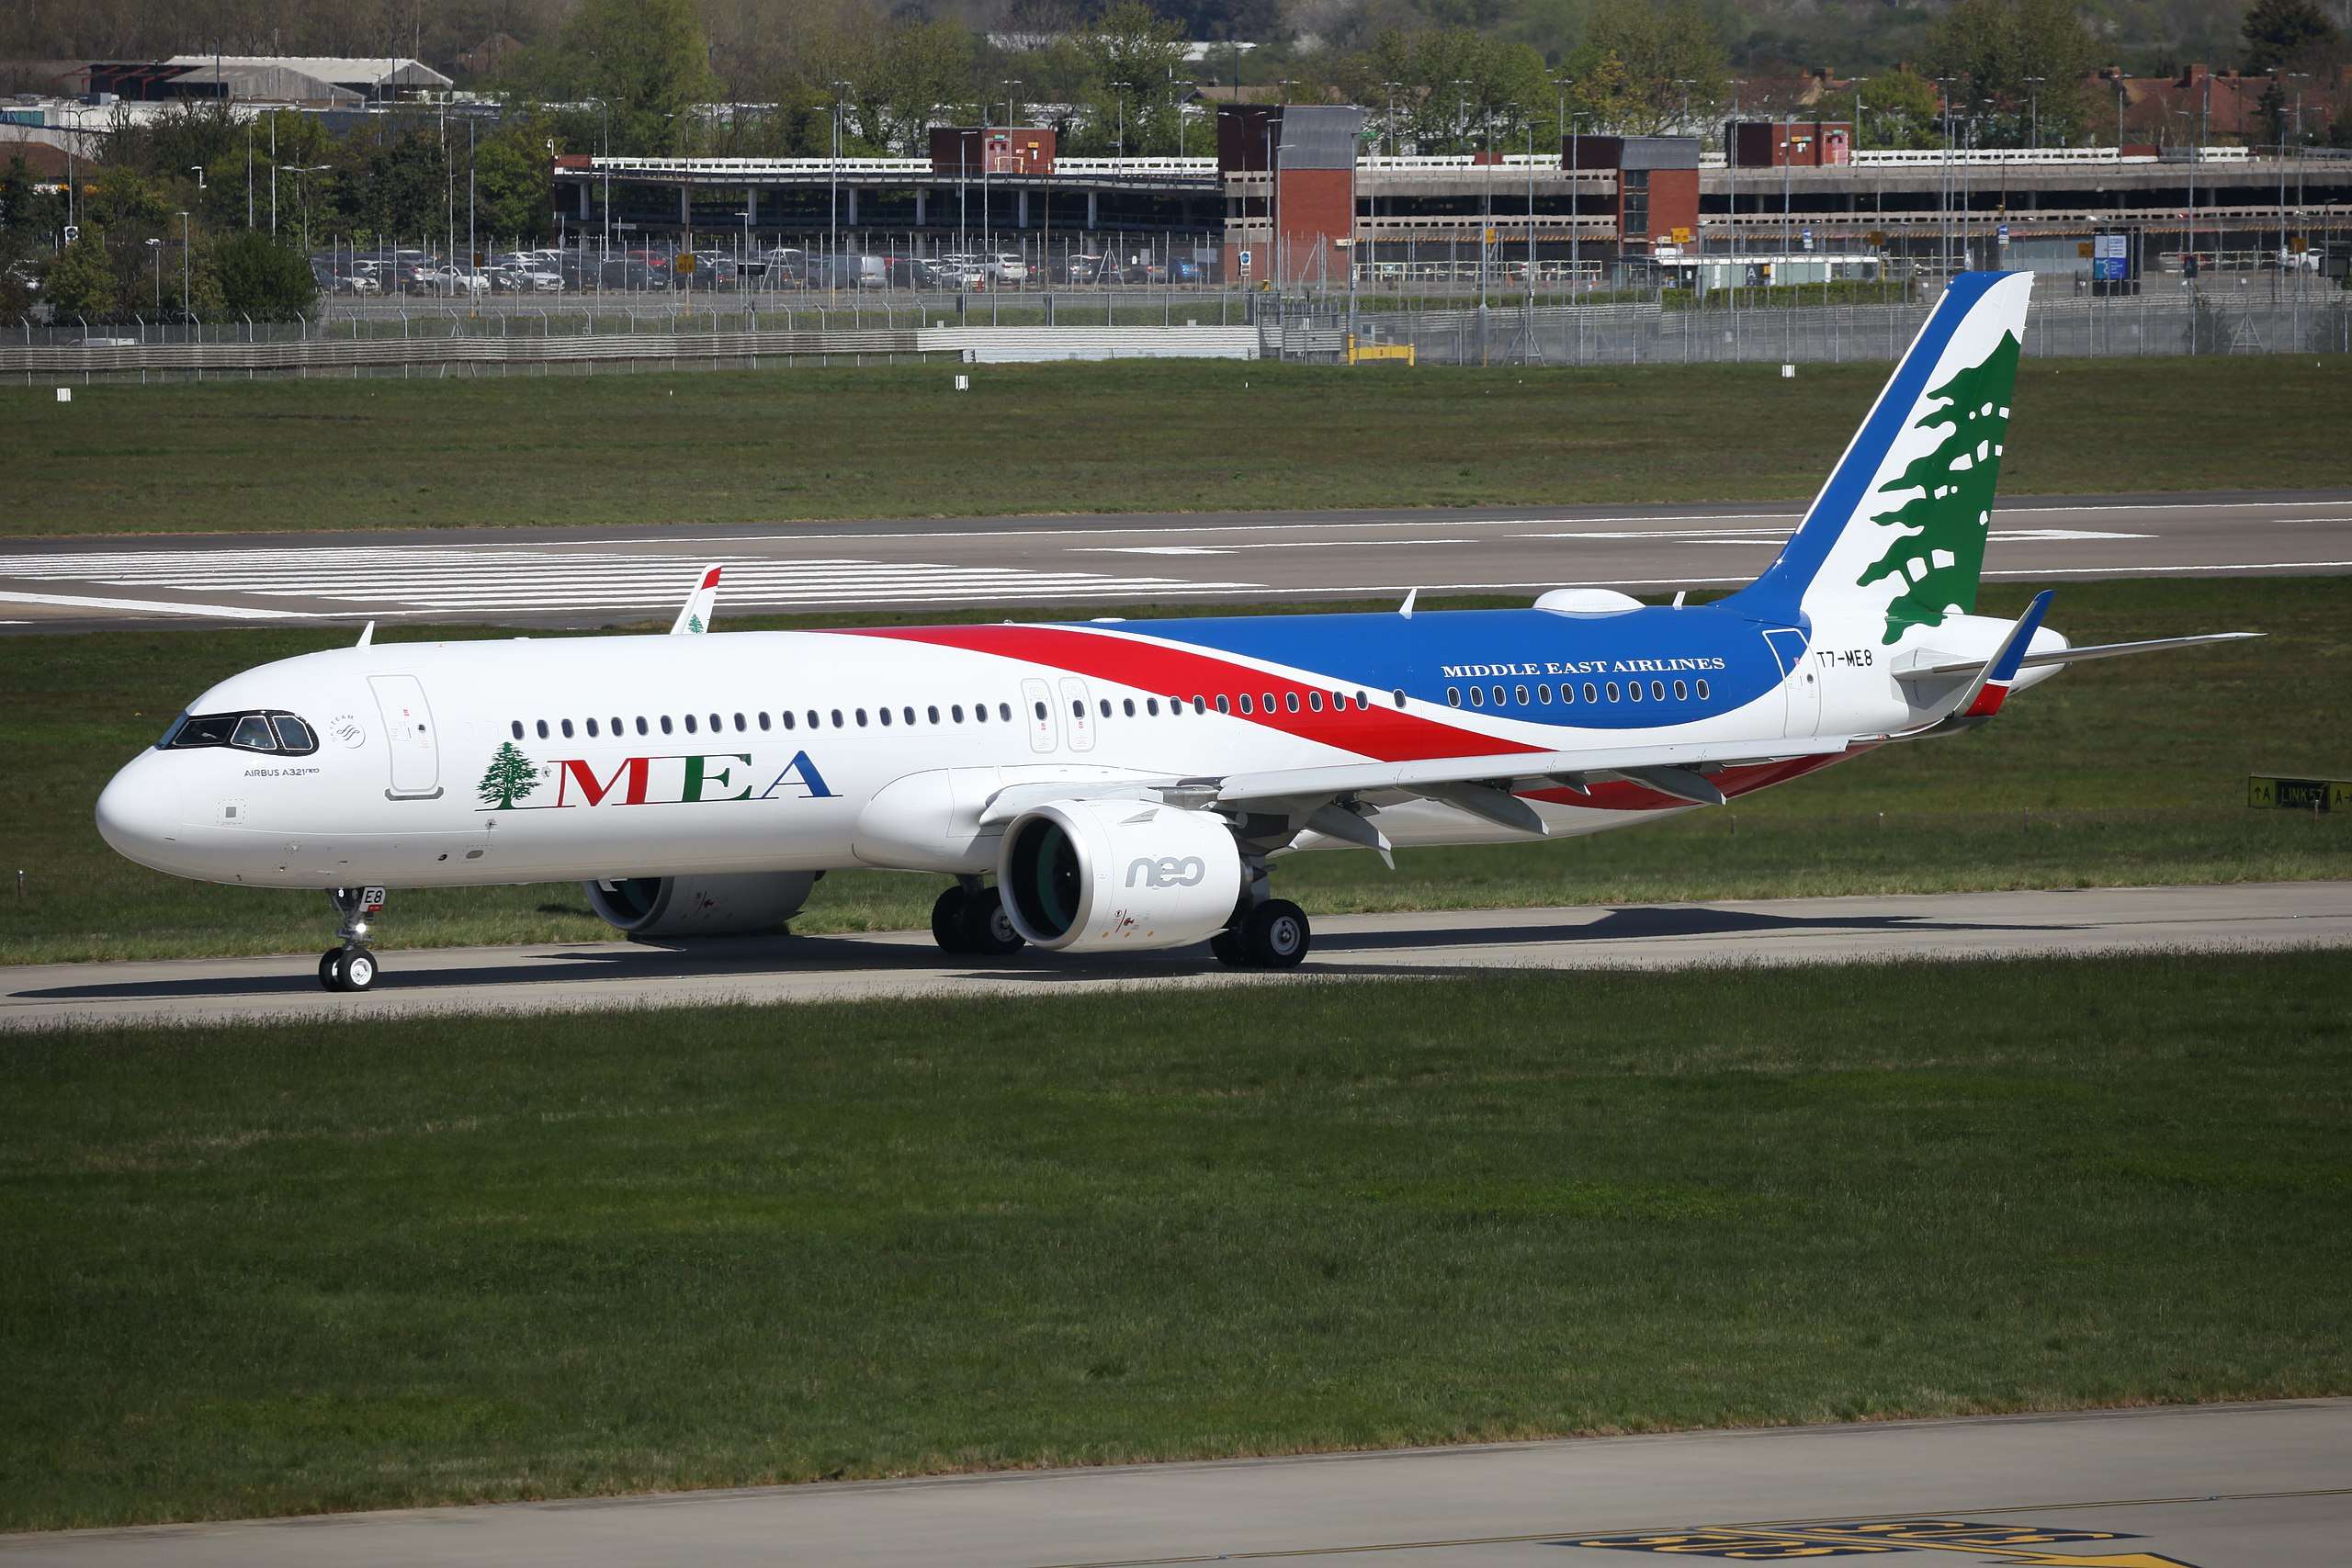 From Beirut to Tbilisi: Middle East Airlines To Operate Charters